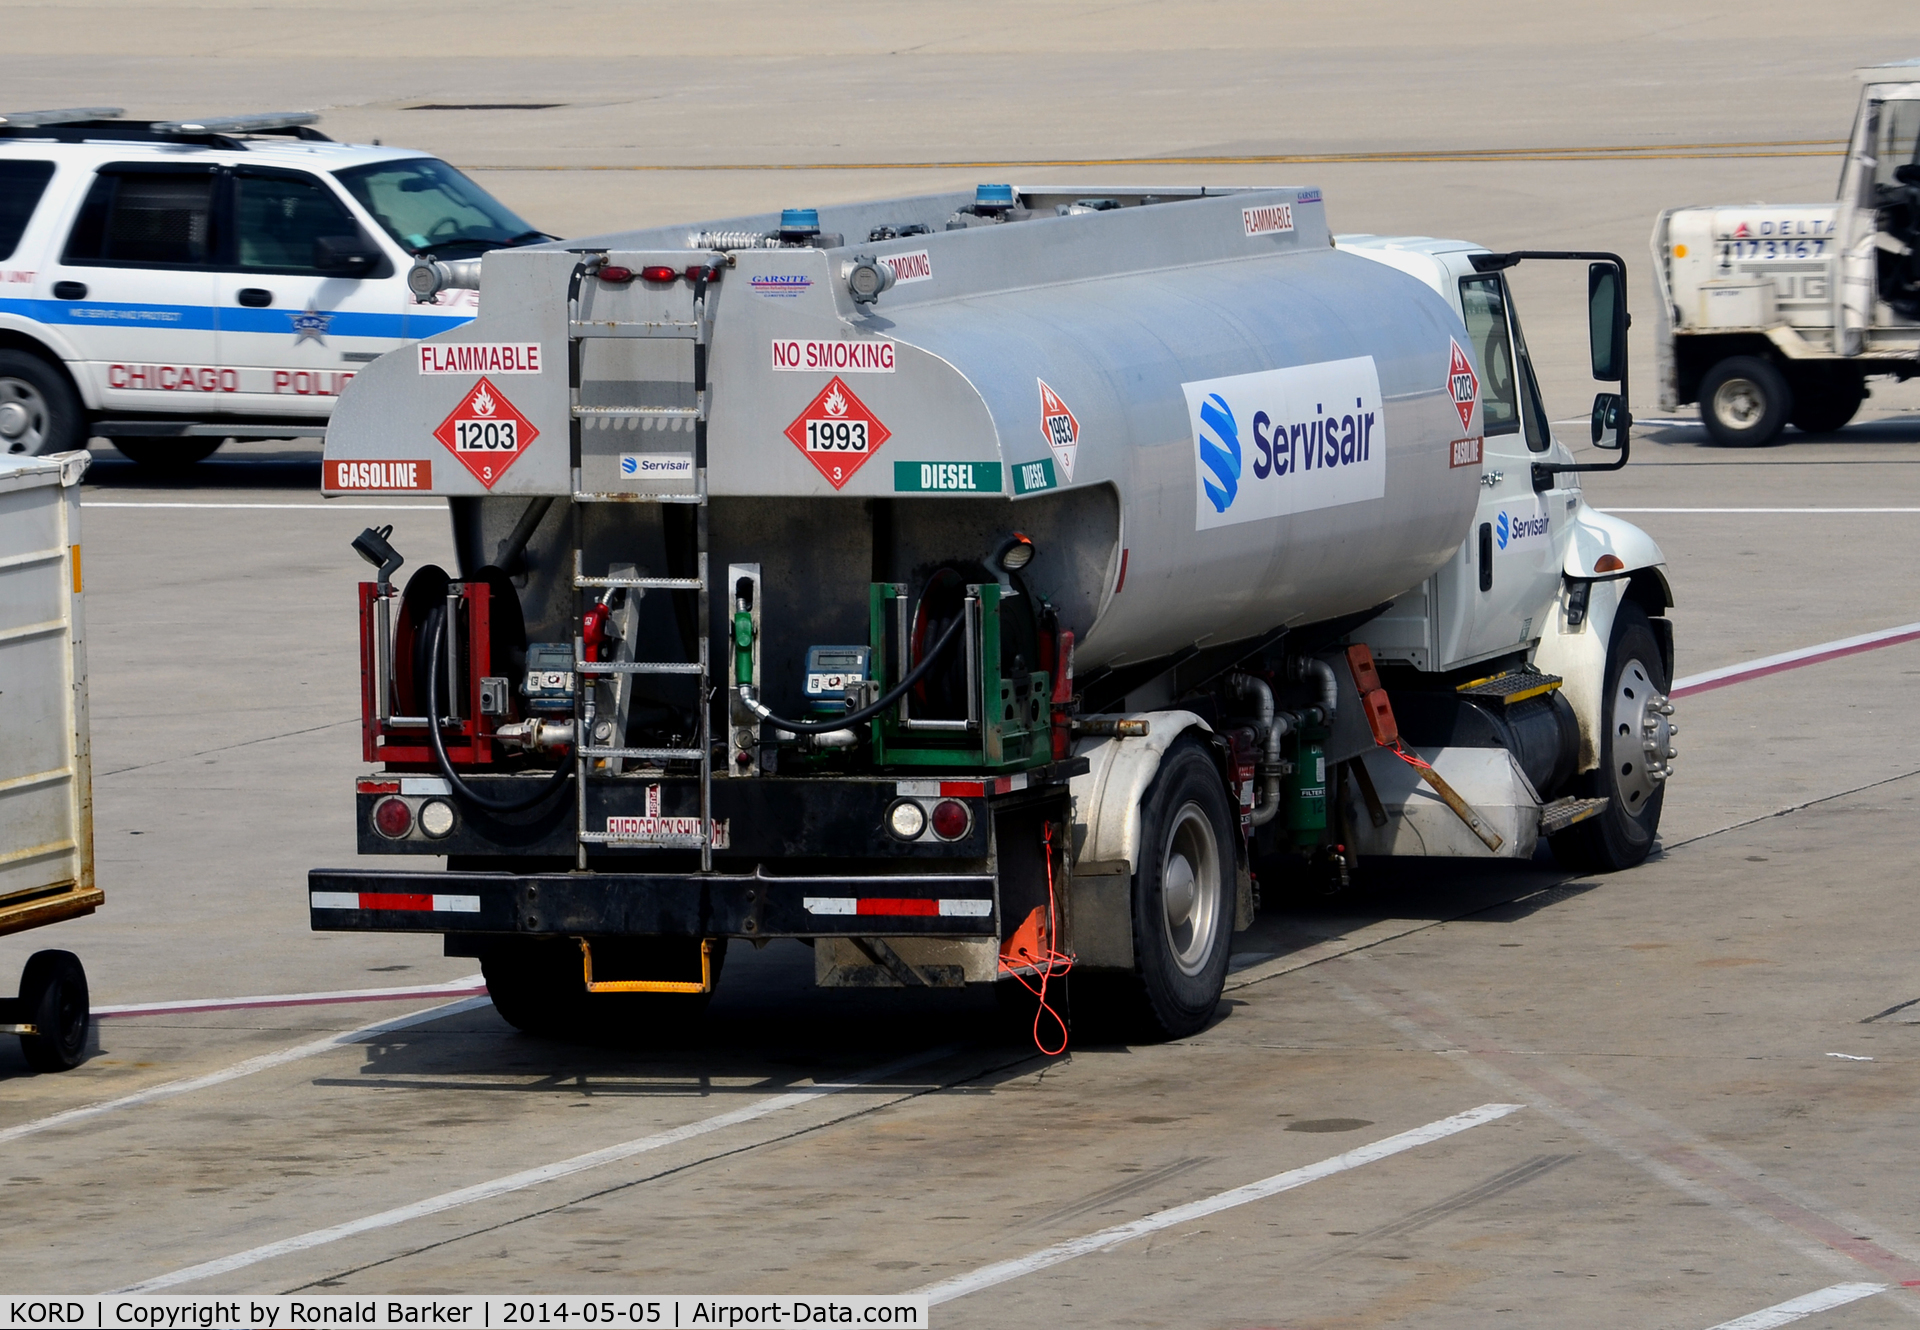 Chicago O'hare International Airport (ORD) - Fuel truck O'Hare